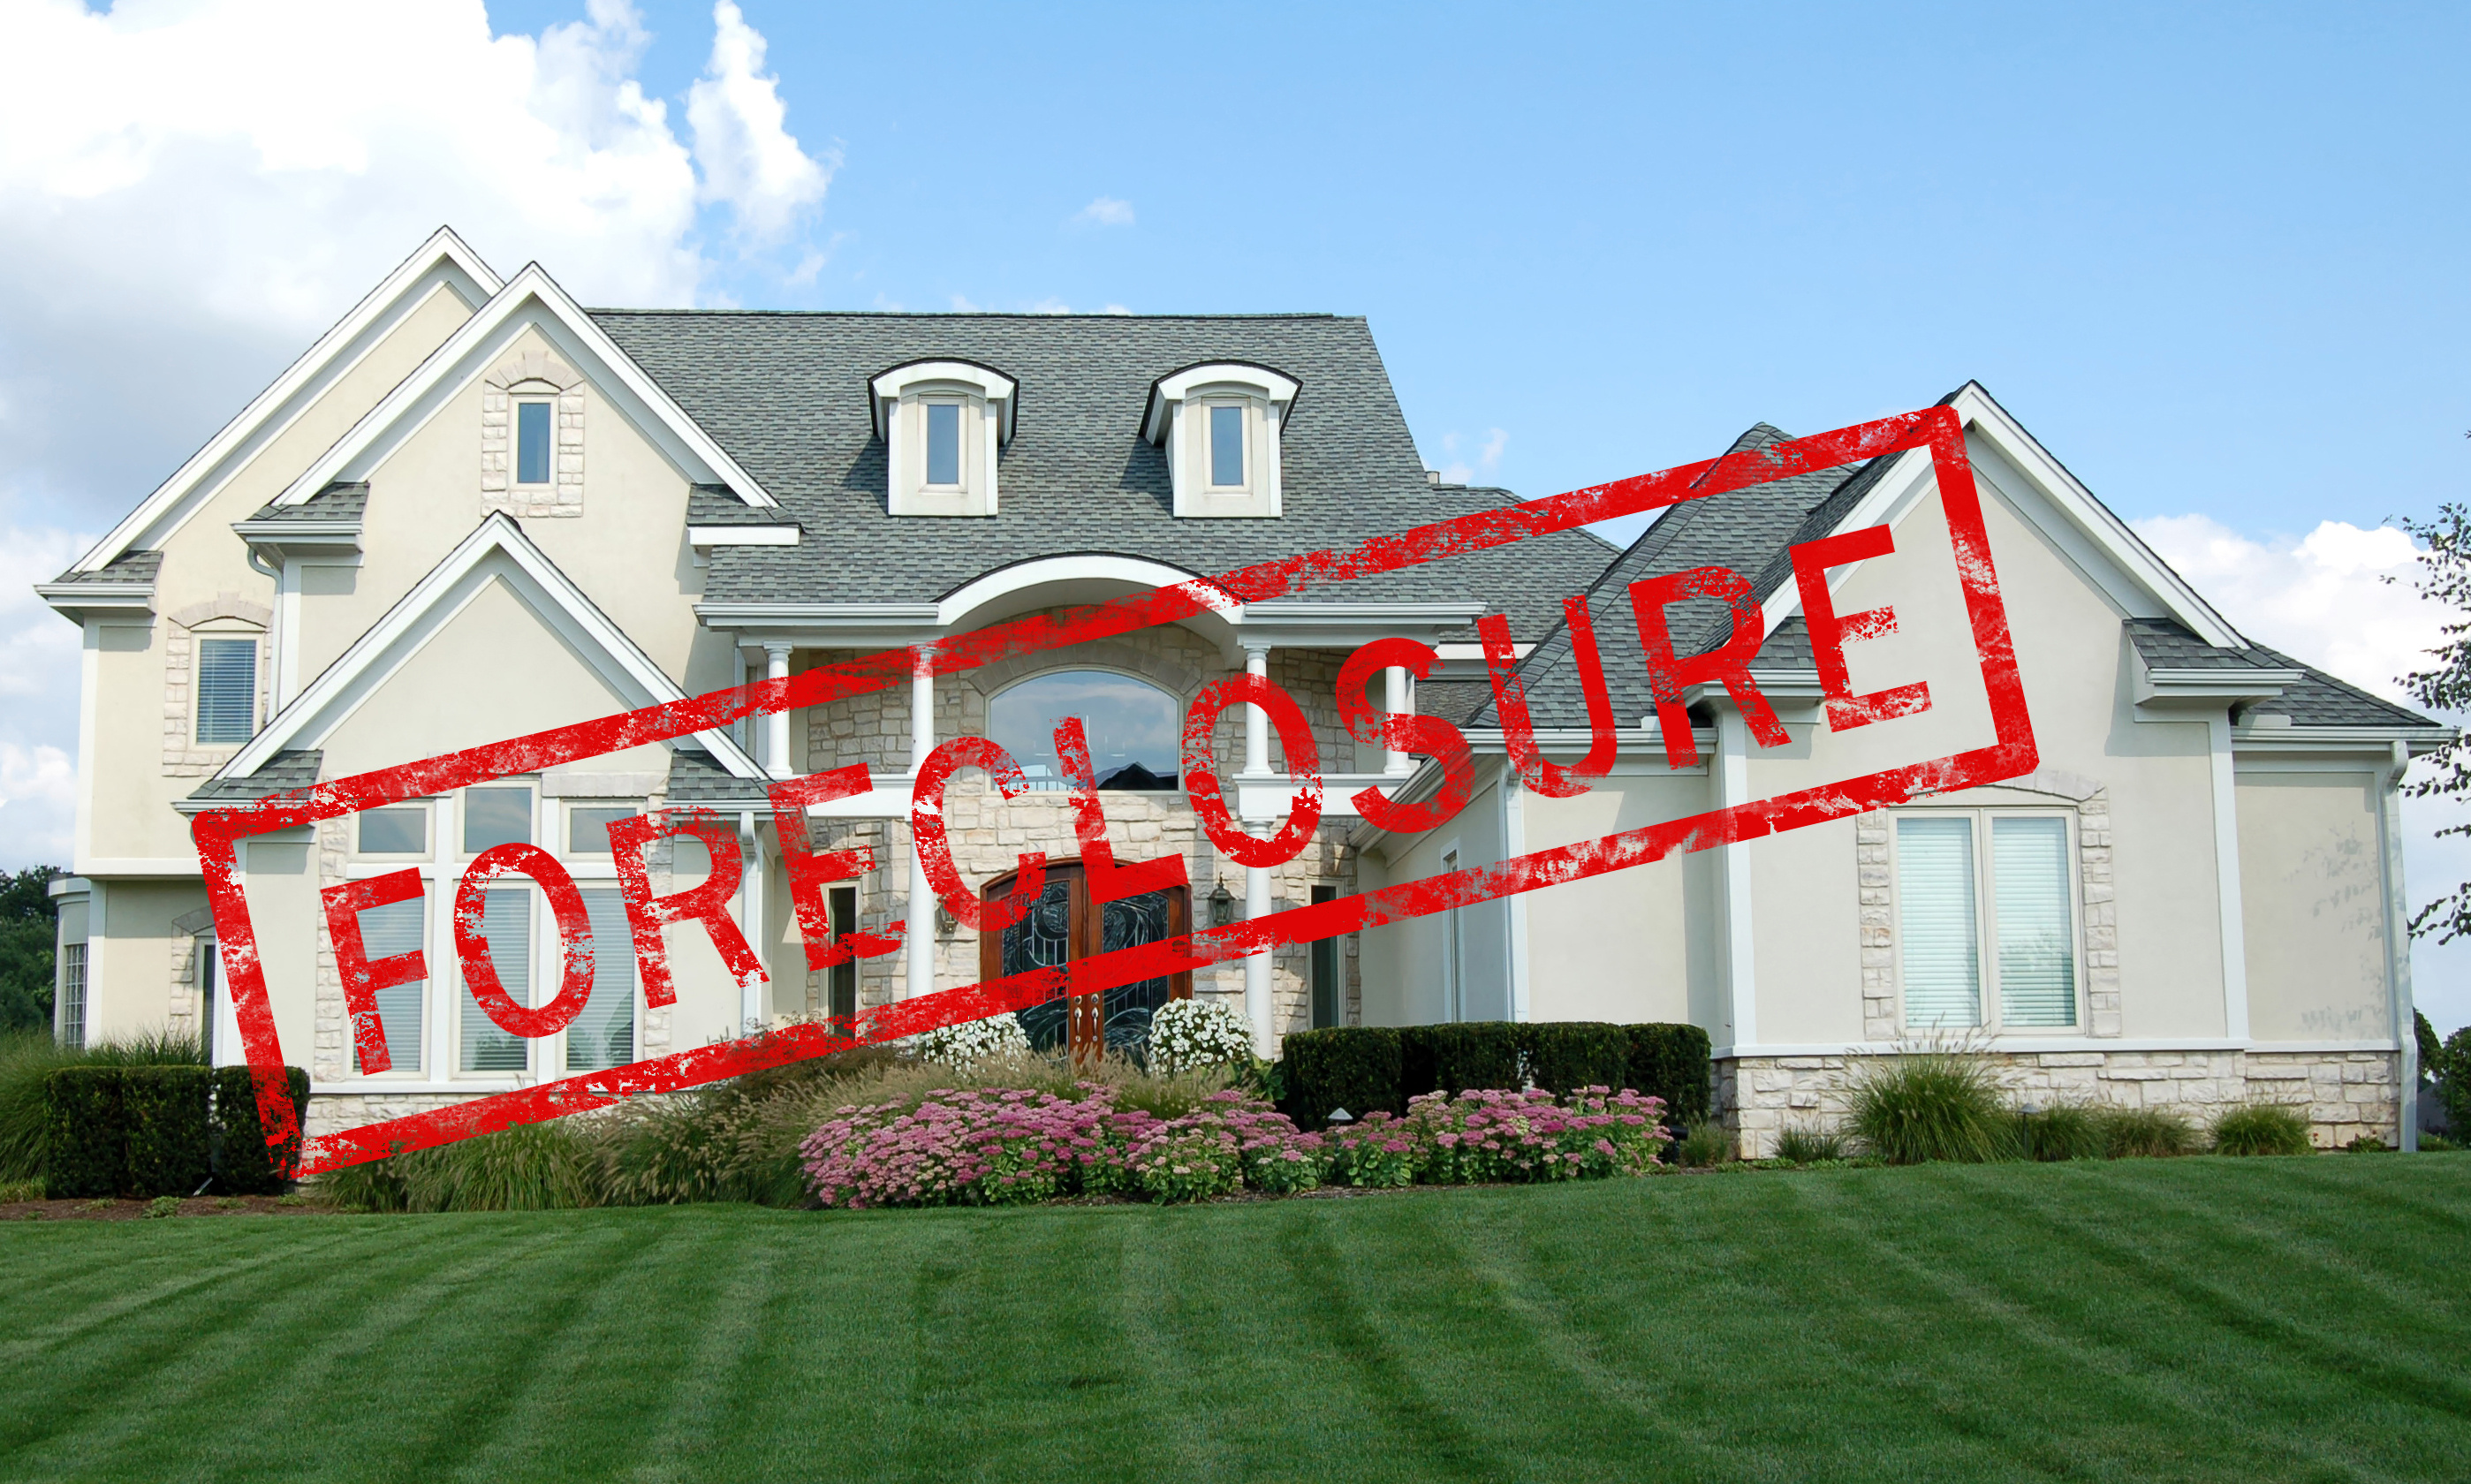 Call Laprise Appraisal, LLC  to order valuations of Hillsborough foreclosures